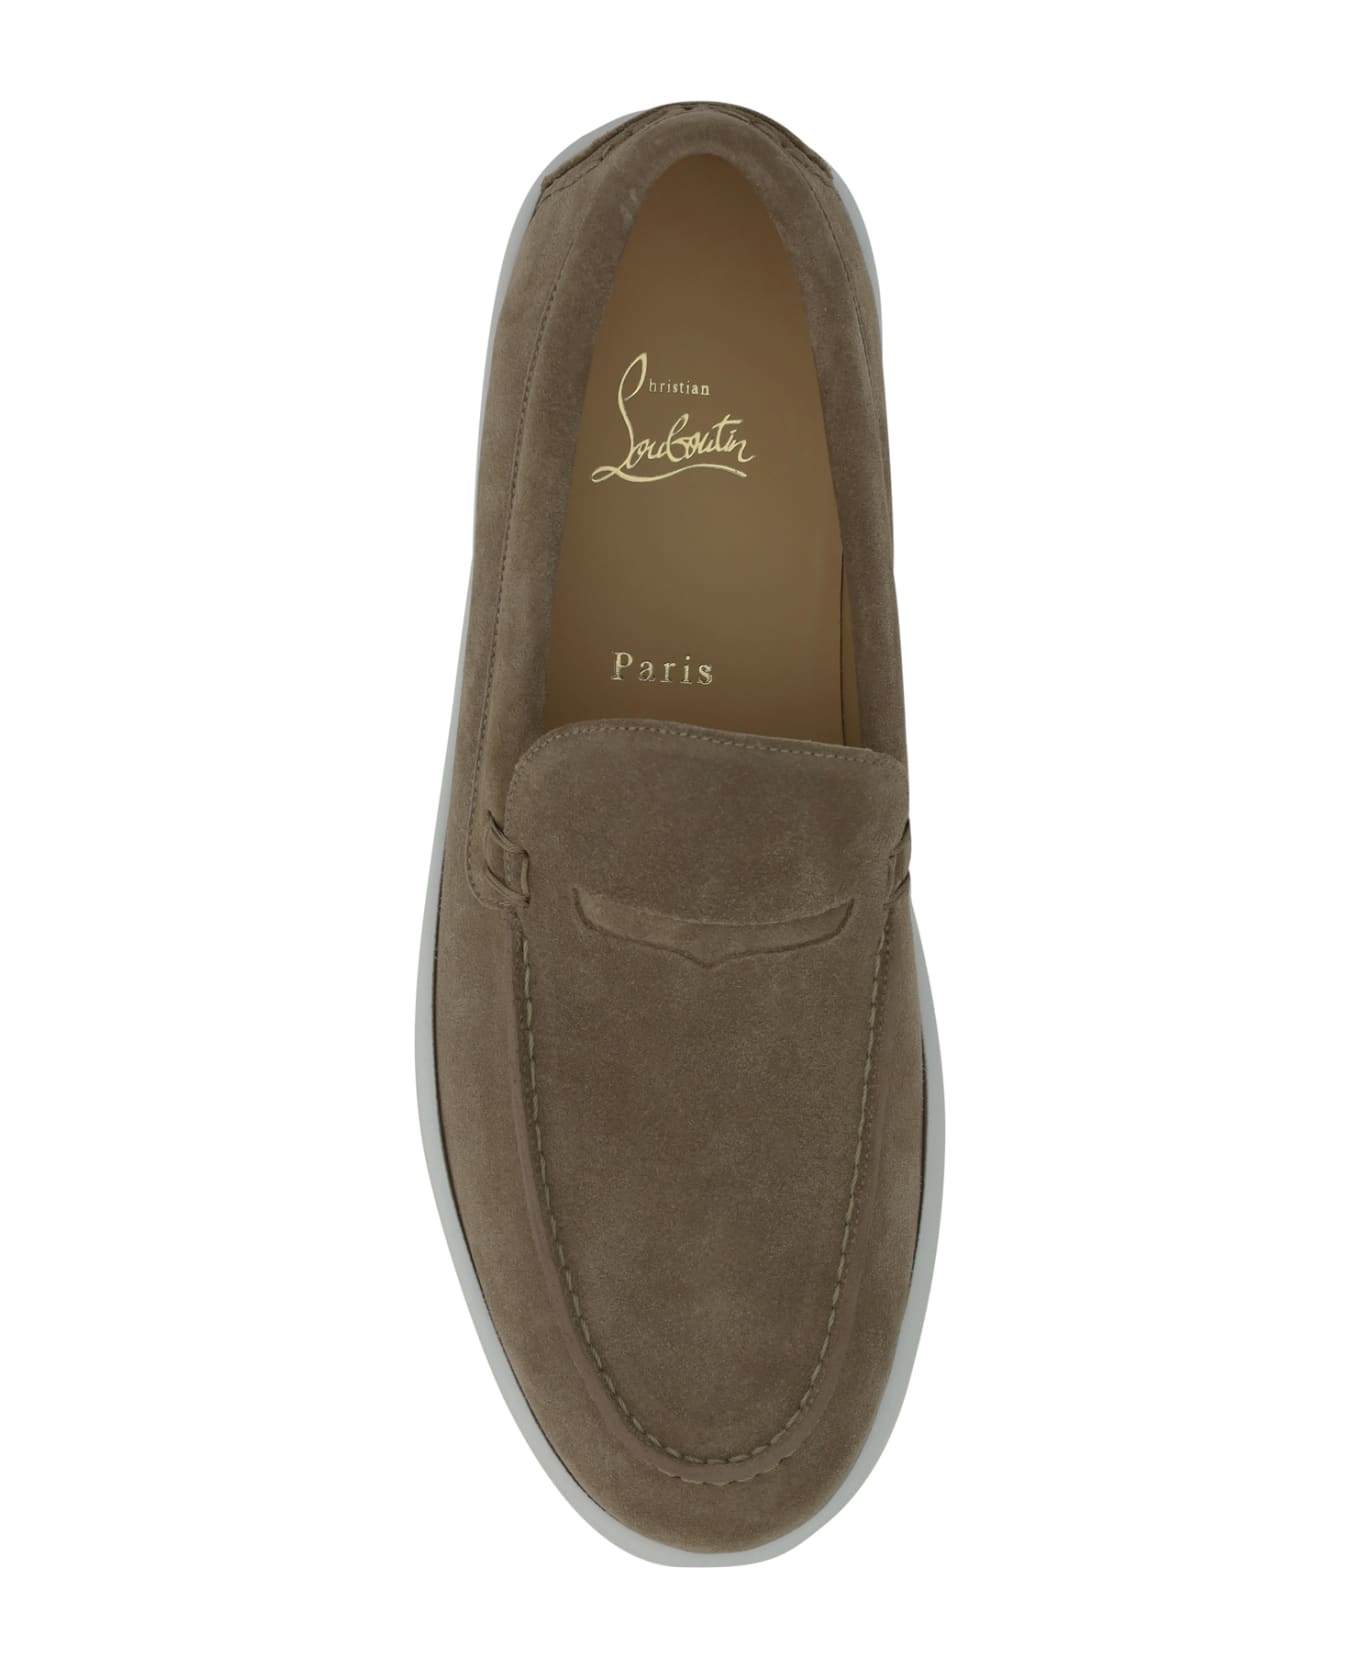 Christian Louboutin Paquesboat Loafers - Saharienne